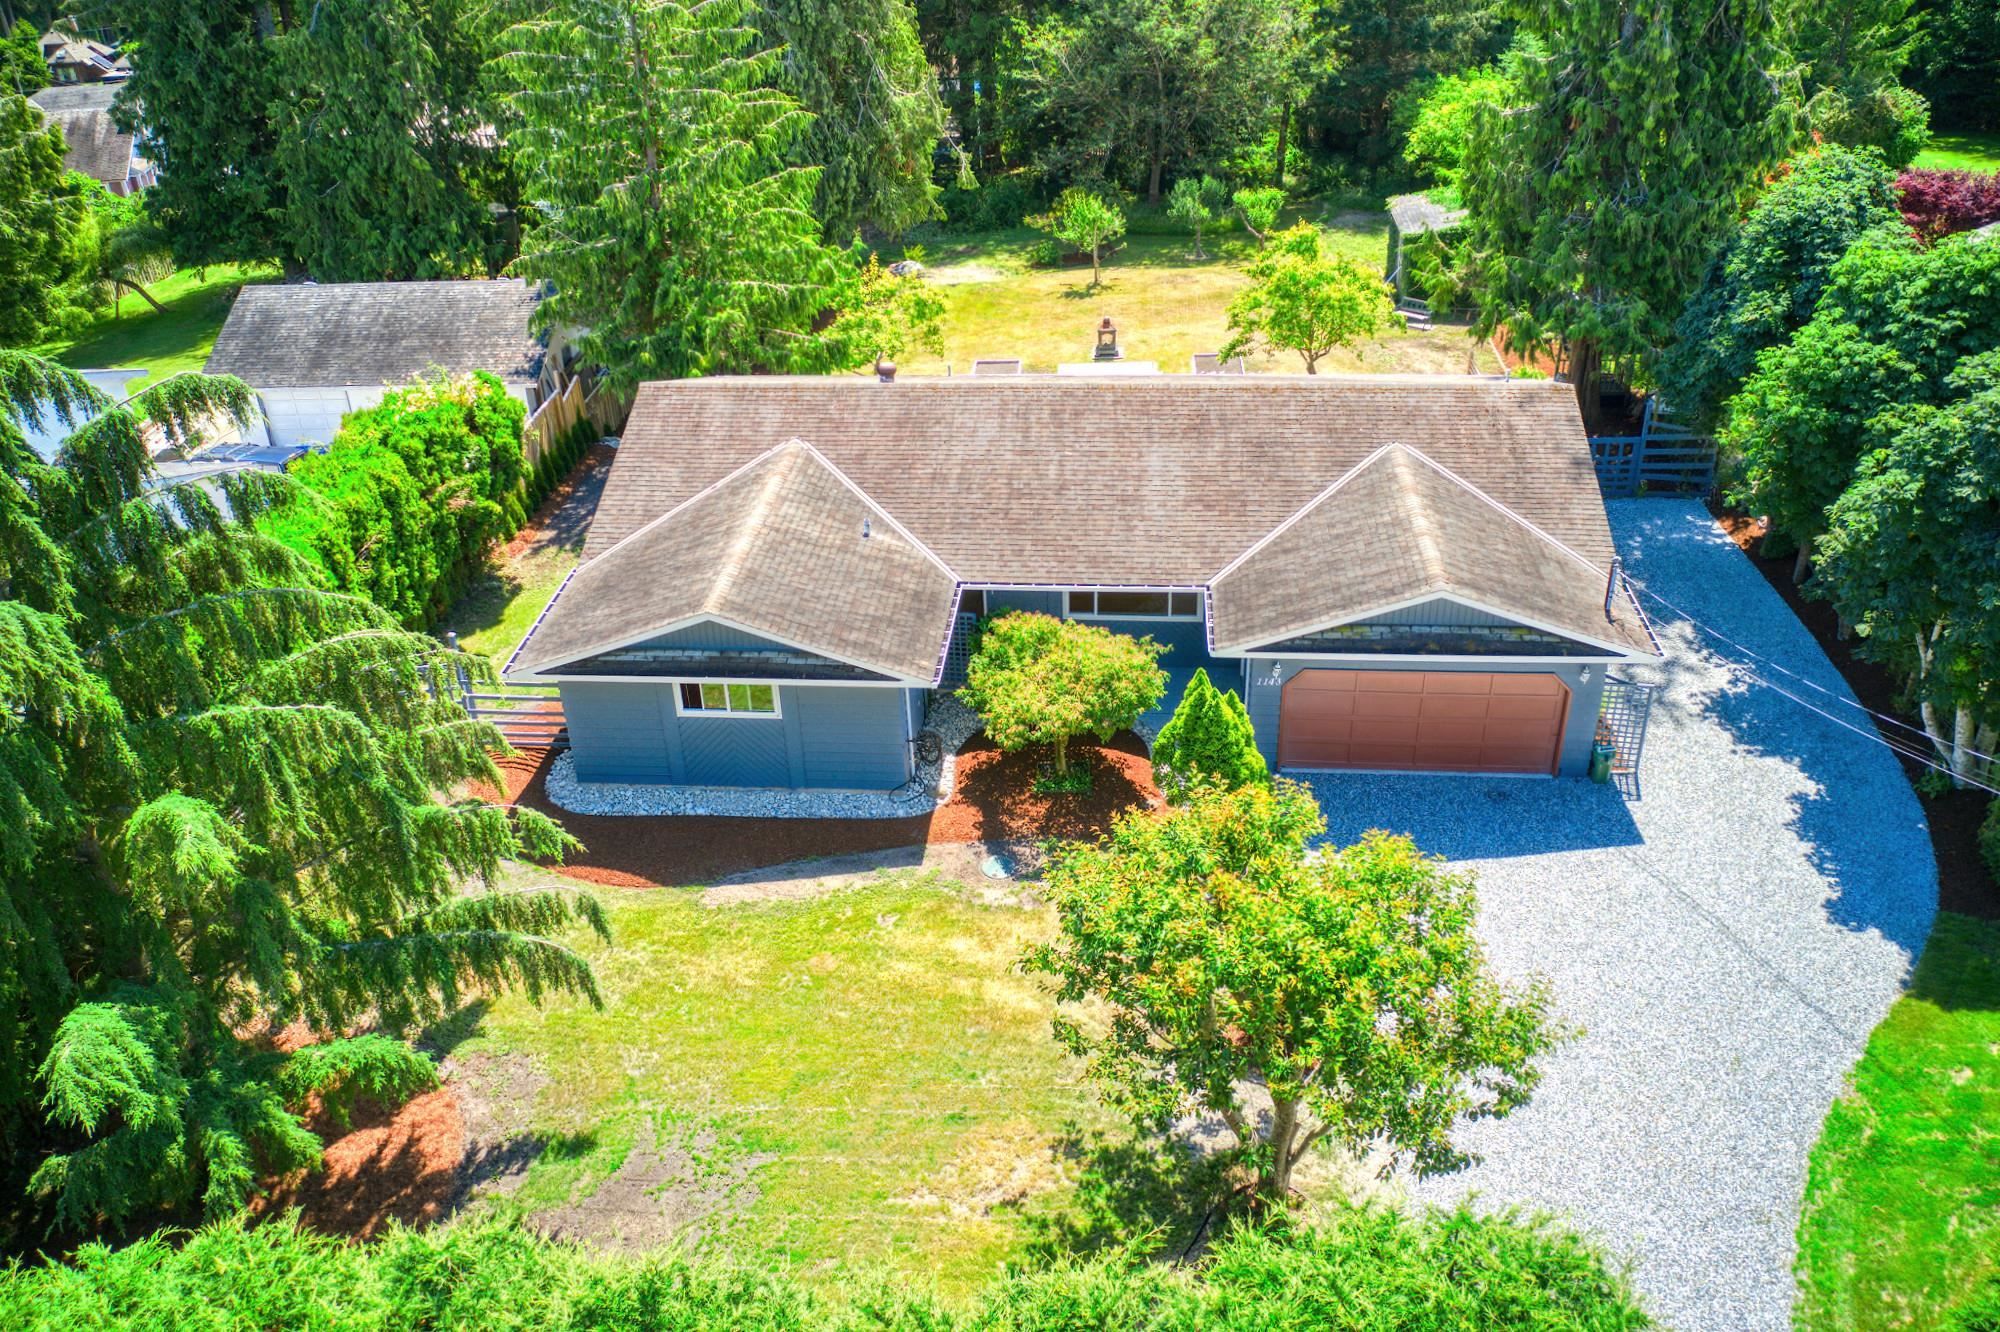 Open House. Open House on Saturday, July 30, 2022 11:00AM - 1:00PM
drive down Pratt rd off the highway and turn right 2 turns past Chaster Rd. Heather in Attendance. Bev on phone 604 740 2669 or email mrsbevthompson@gmail.com